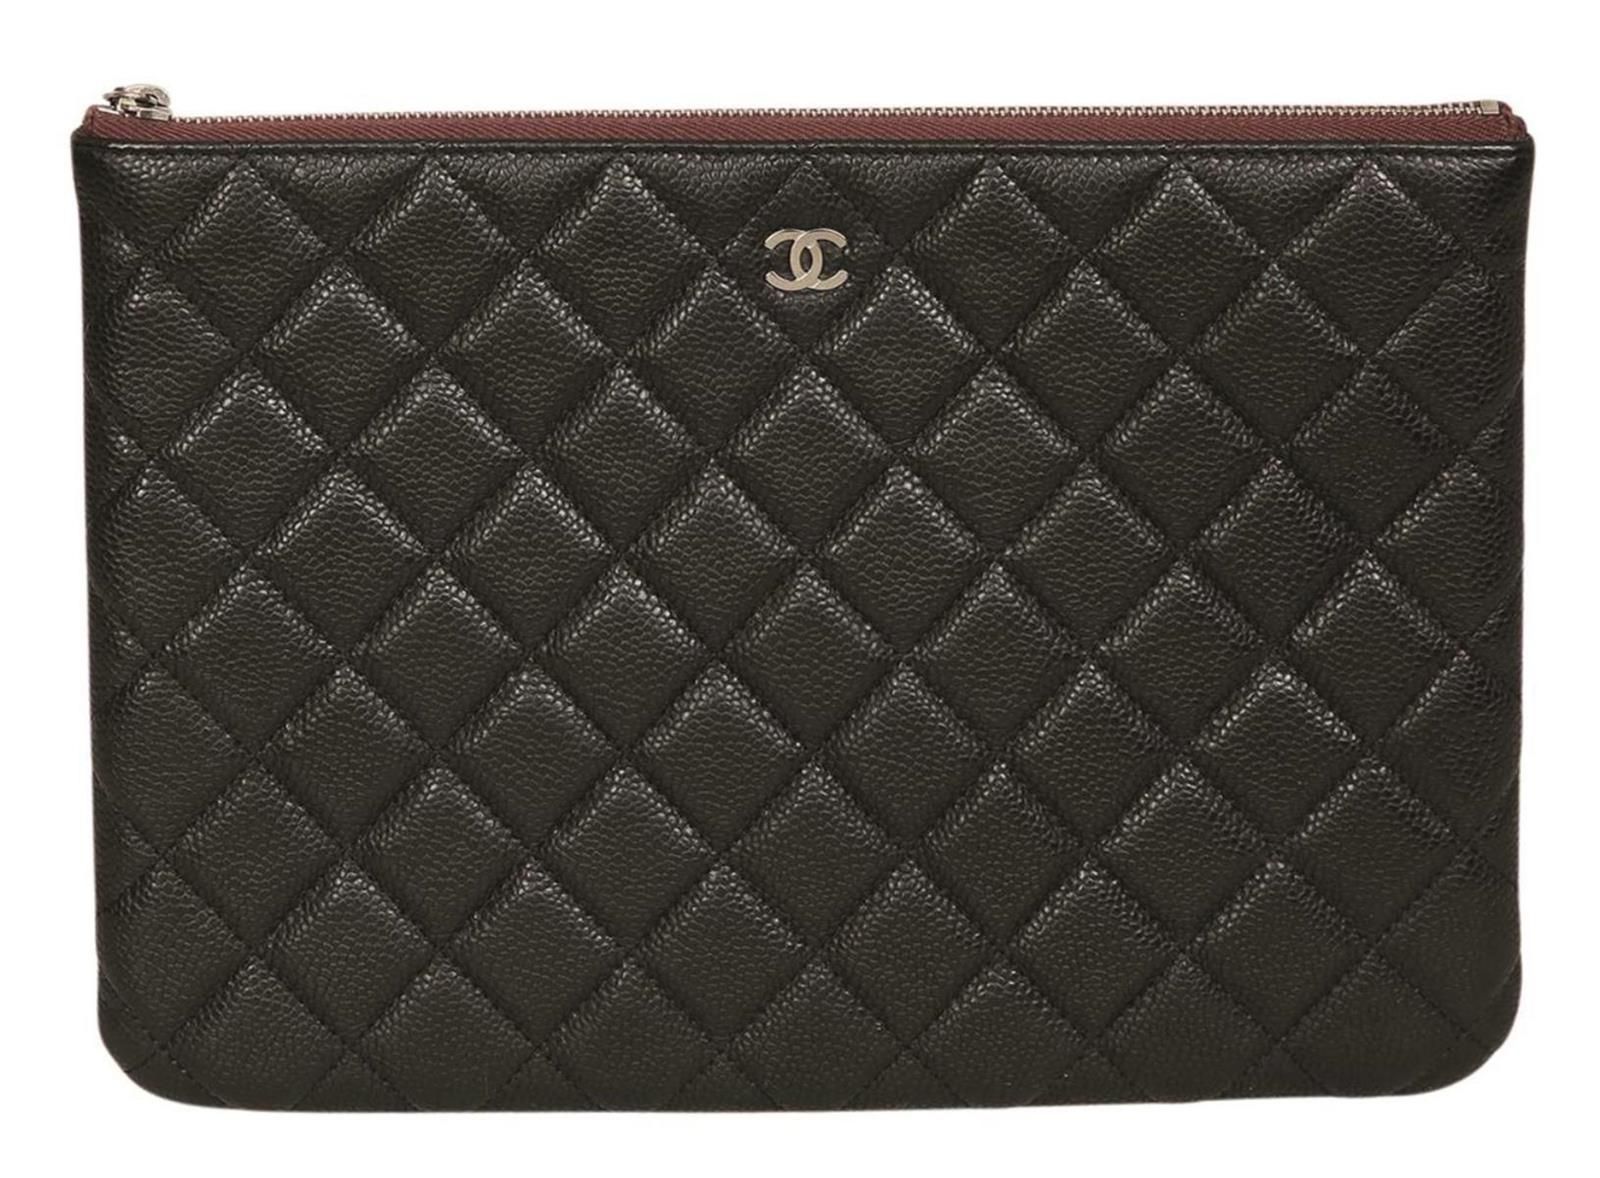 SOLD Chanel Chevron Trendy CC WOC Gold Top Plate